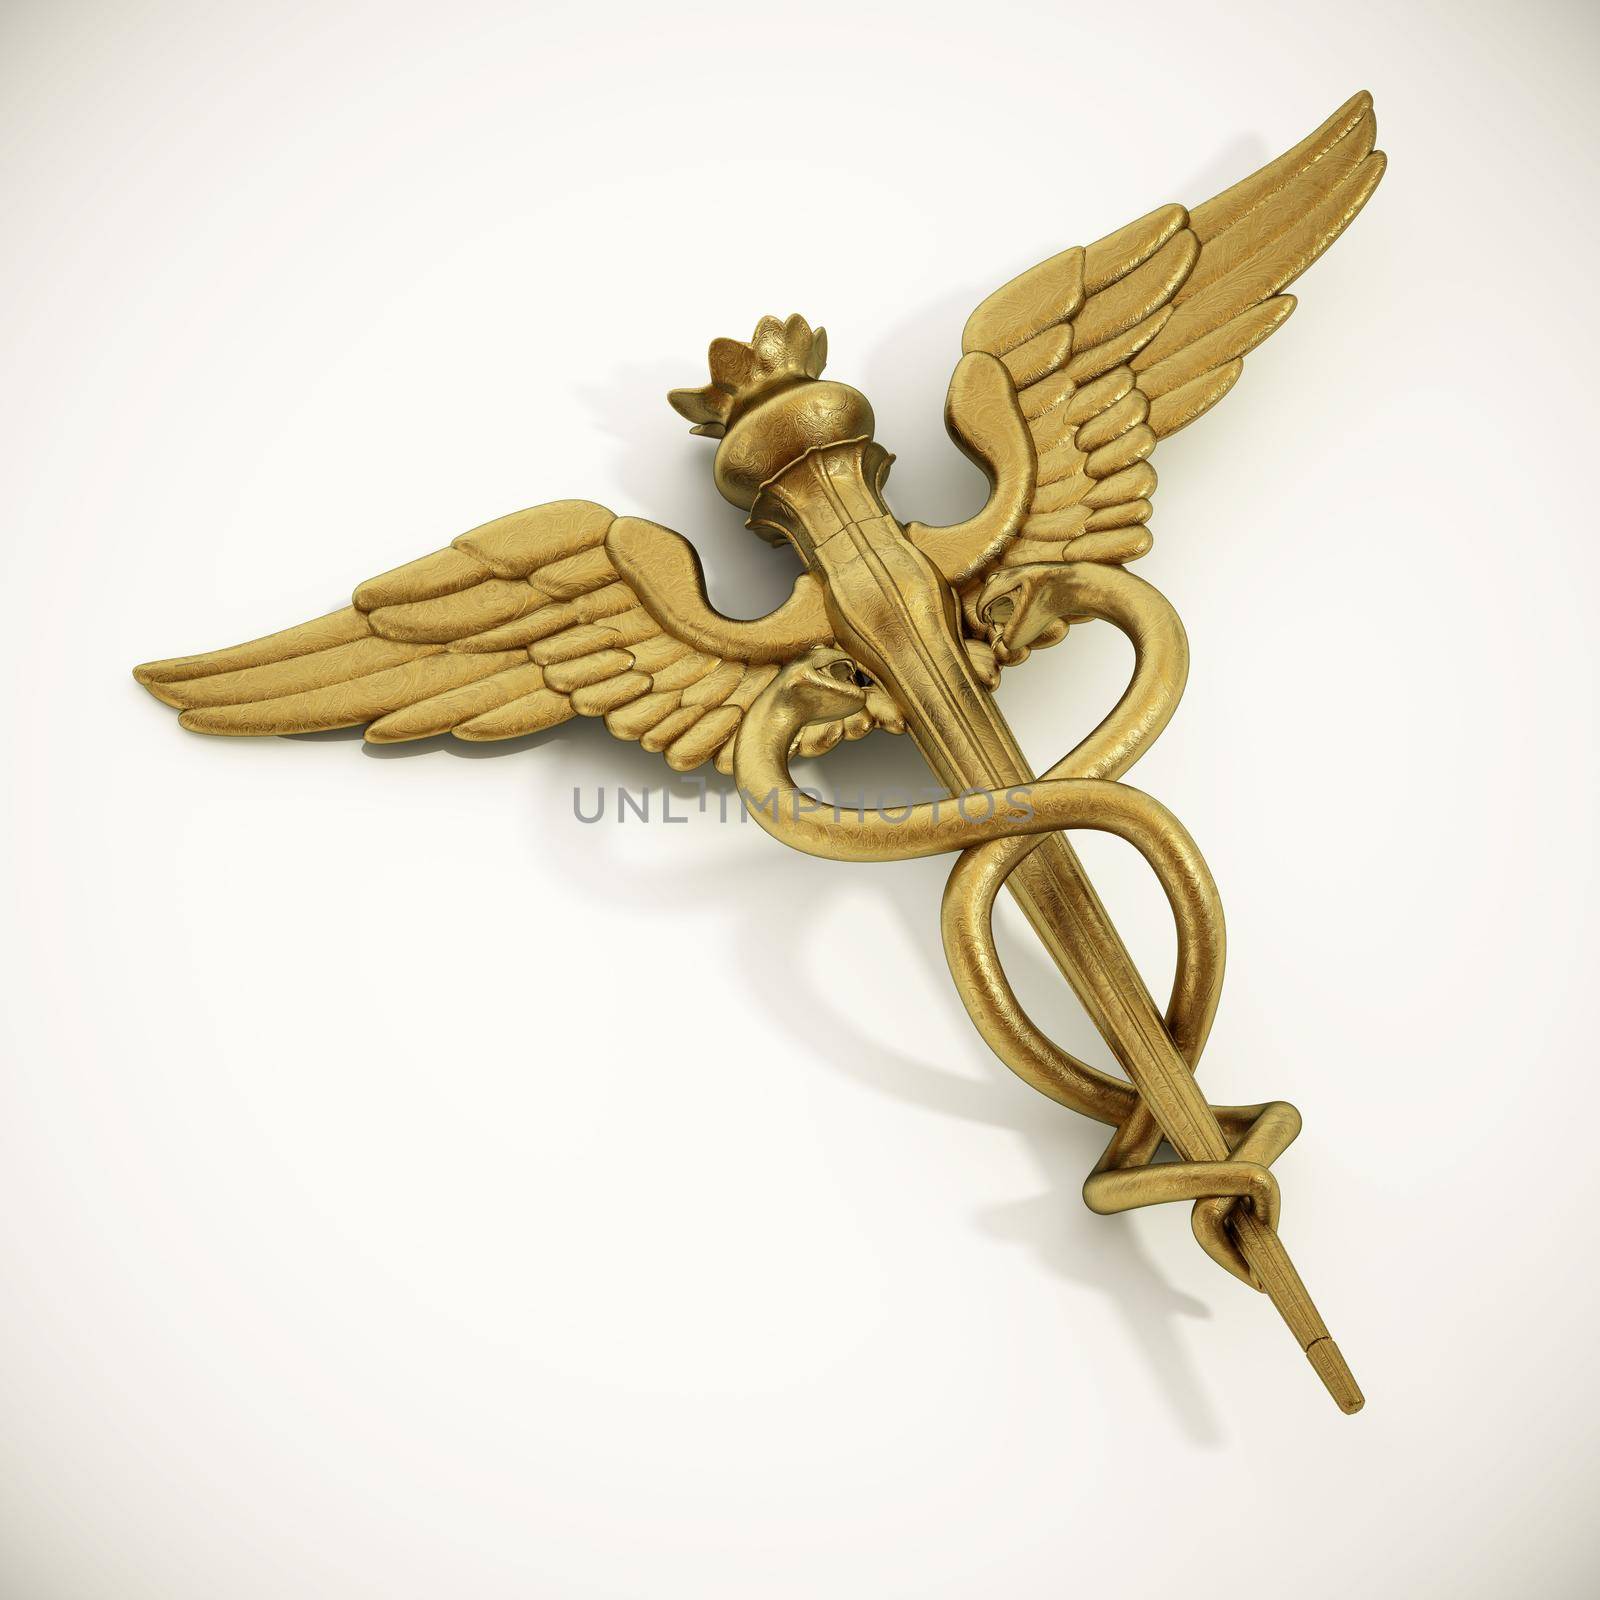 Gold caduceus symbol isolated on white background. 3D illustration by Simsek